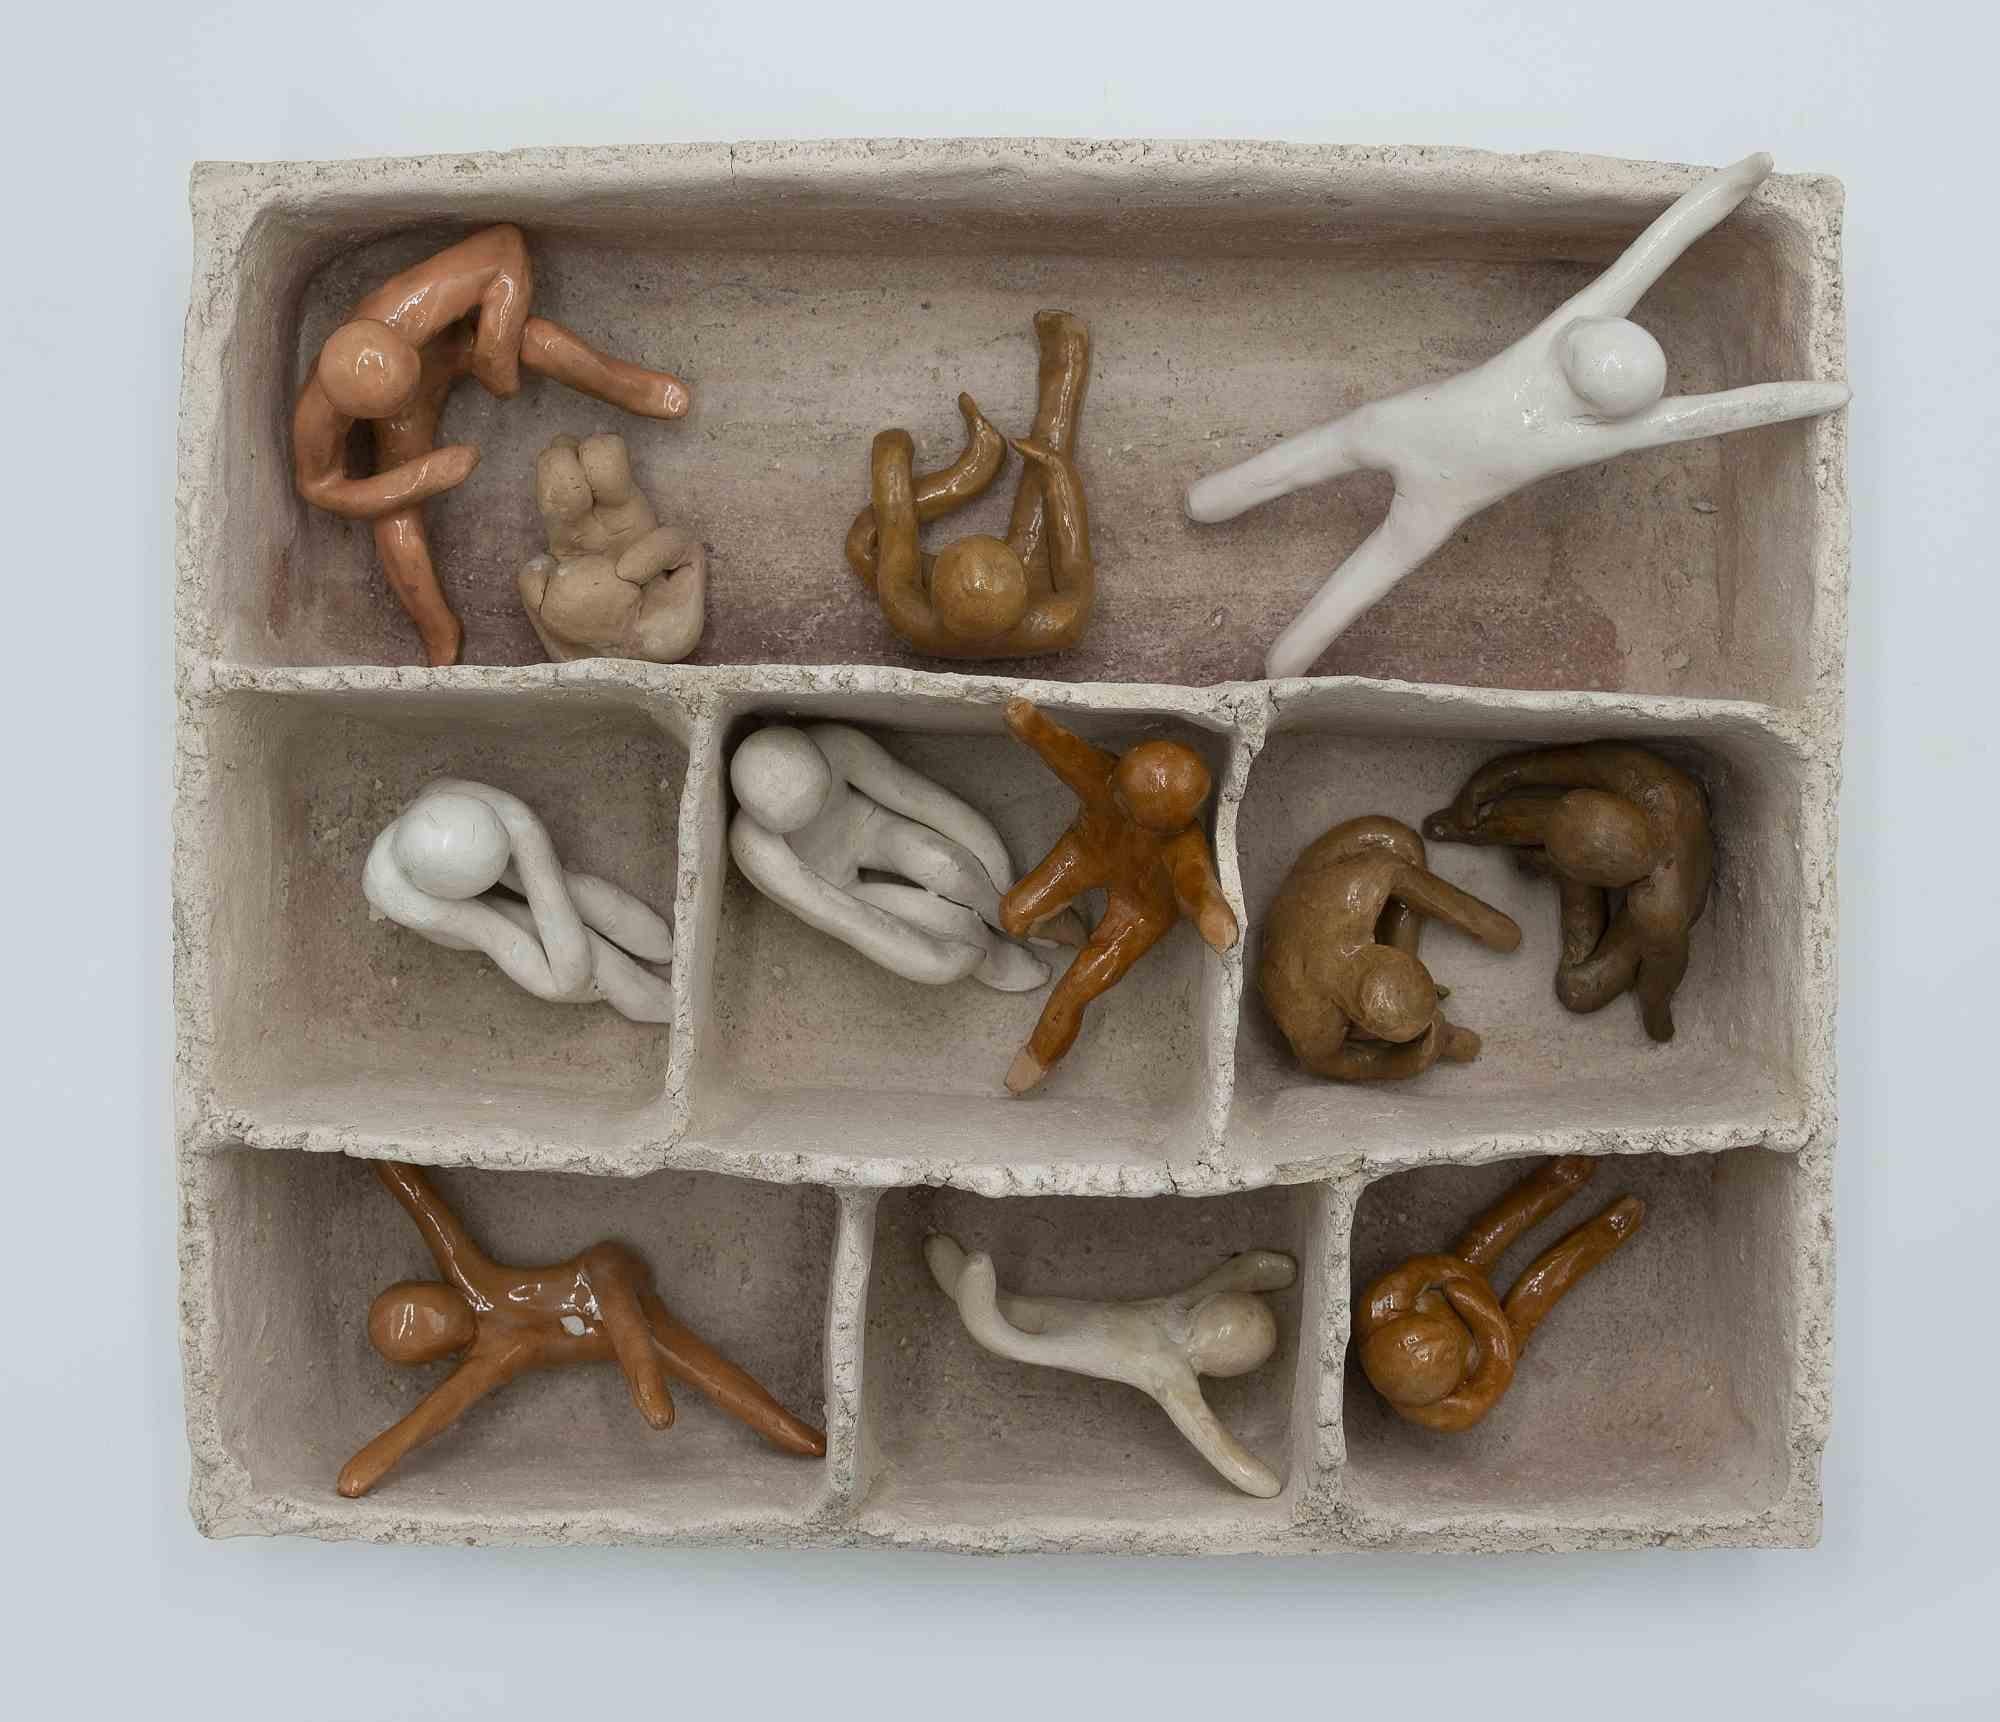 Unknown Figurative Sculpture - Box with Sculptures in Miniature - Sculptures - Late 20th Century